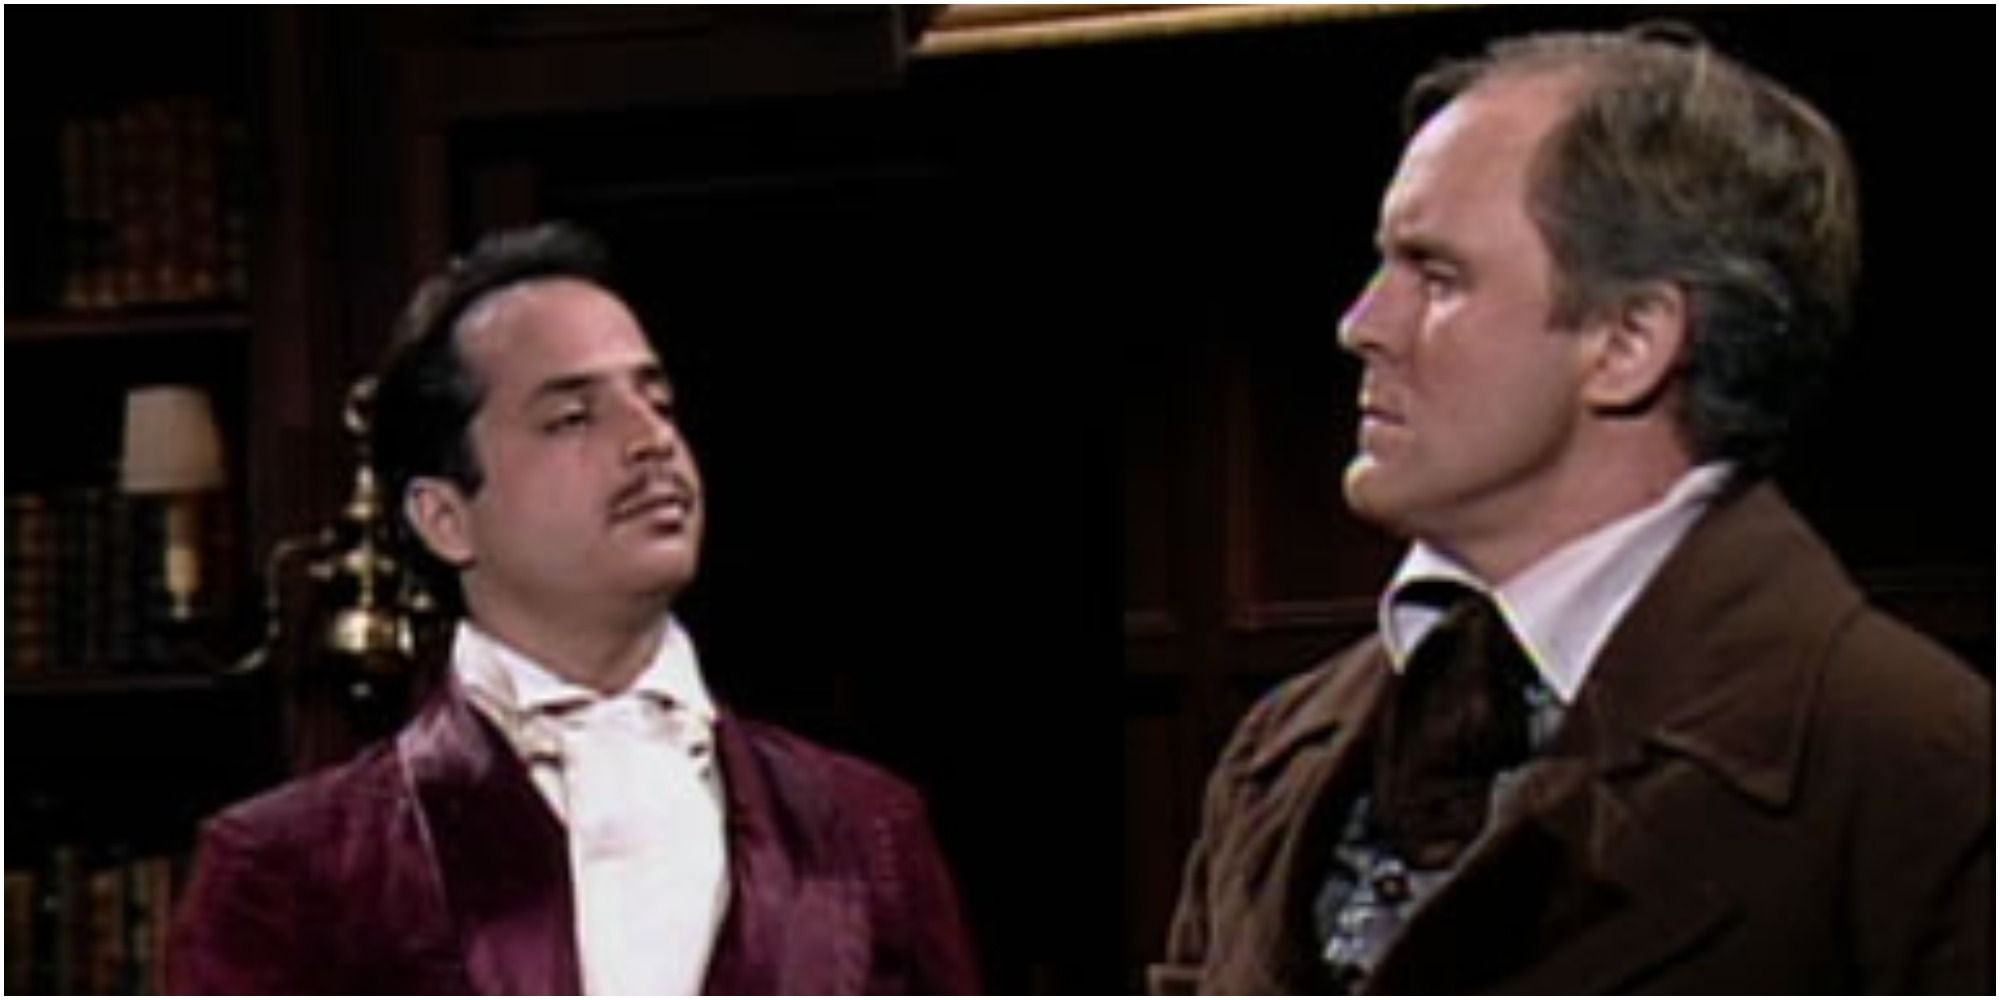 A screenshot of the Master Thespian and his mentor Baudelaire in a showdown from Saturday Night Live